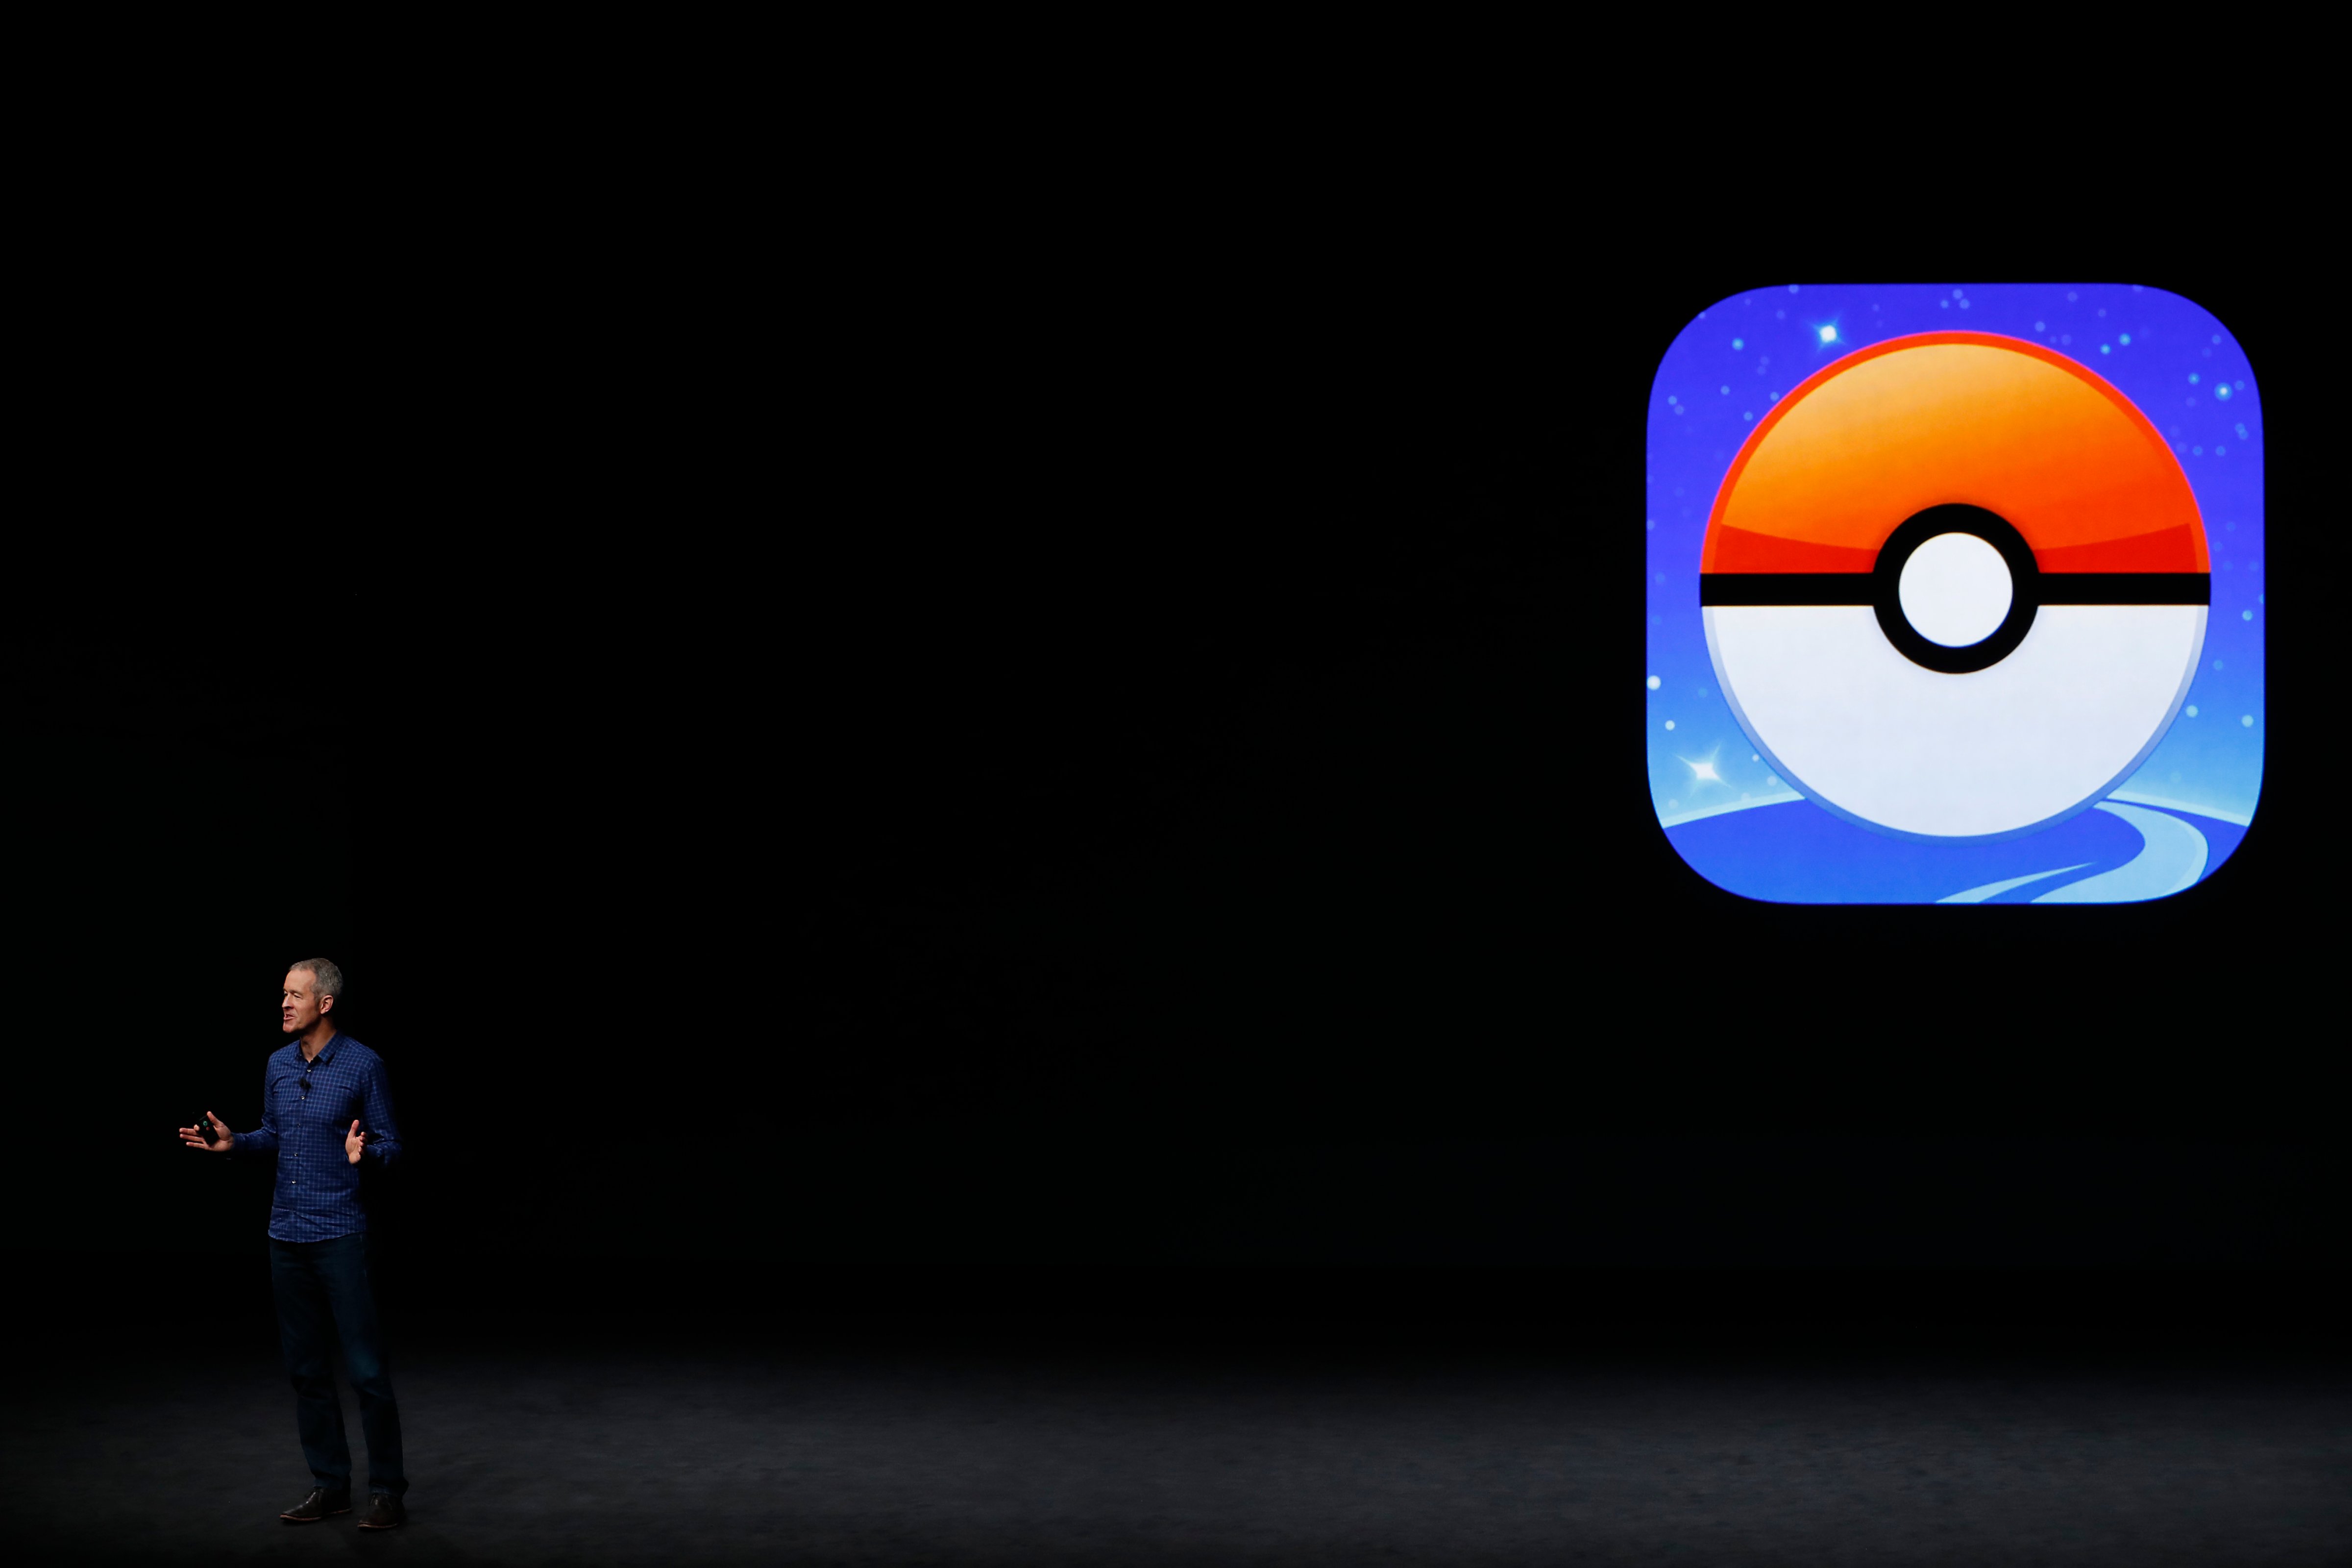 Apple COO Jeff Williams announces Pokemon Go for Apple Watch during a launch event on September 7, 2016 in San Francisco, California. (Stephen Lam&mdash;Getty Images)